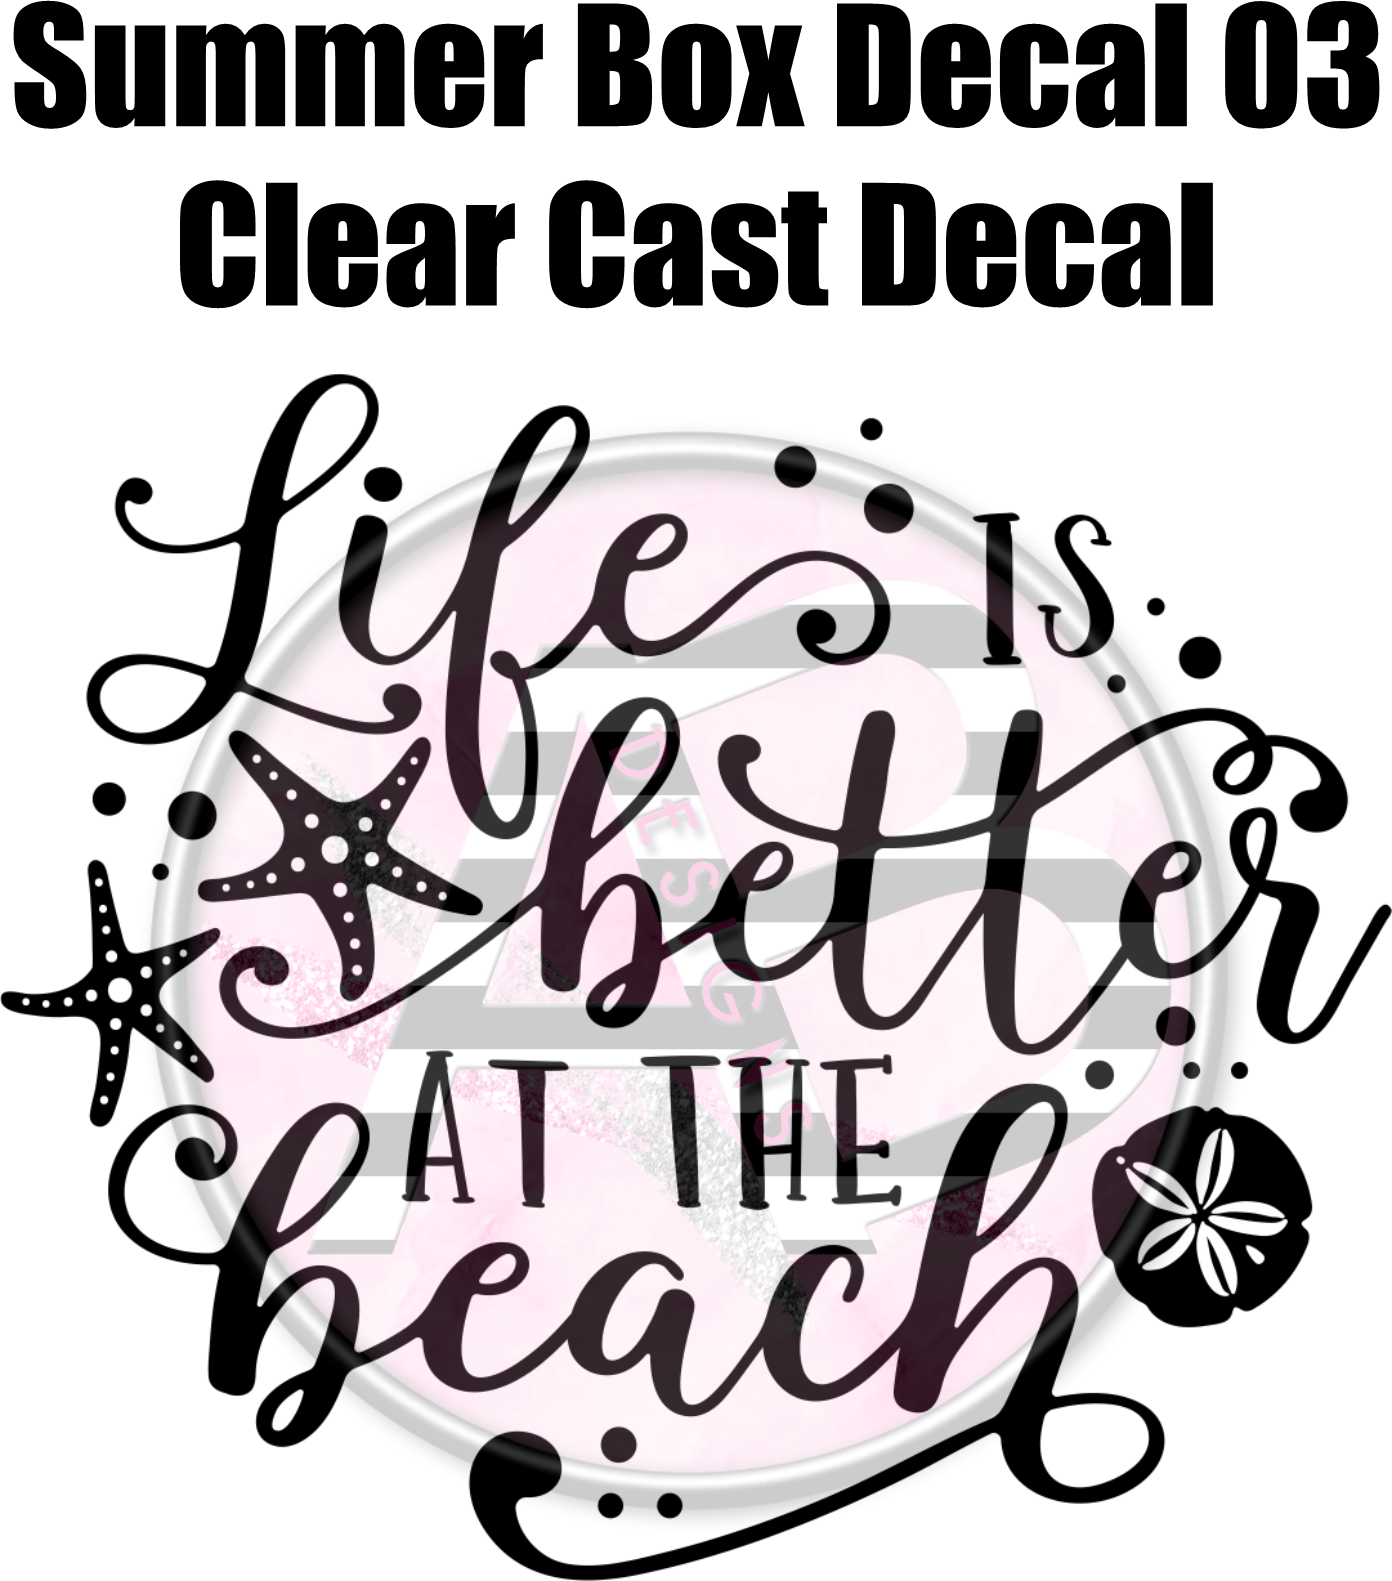 Summer Box Decal 03 - Clear Cast Decal